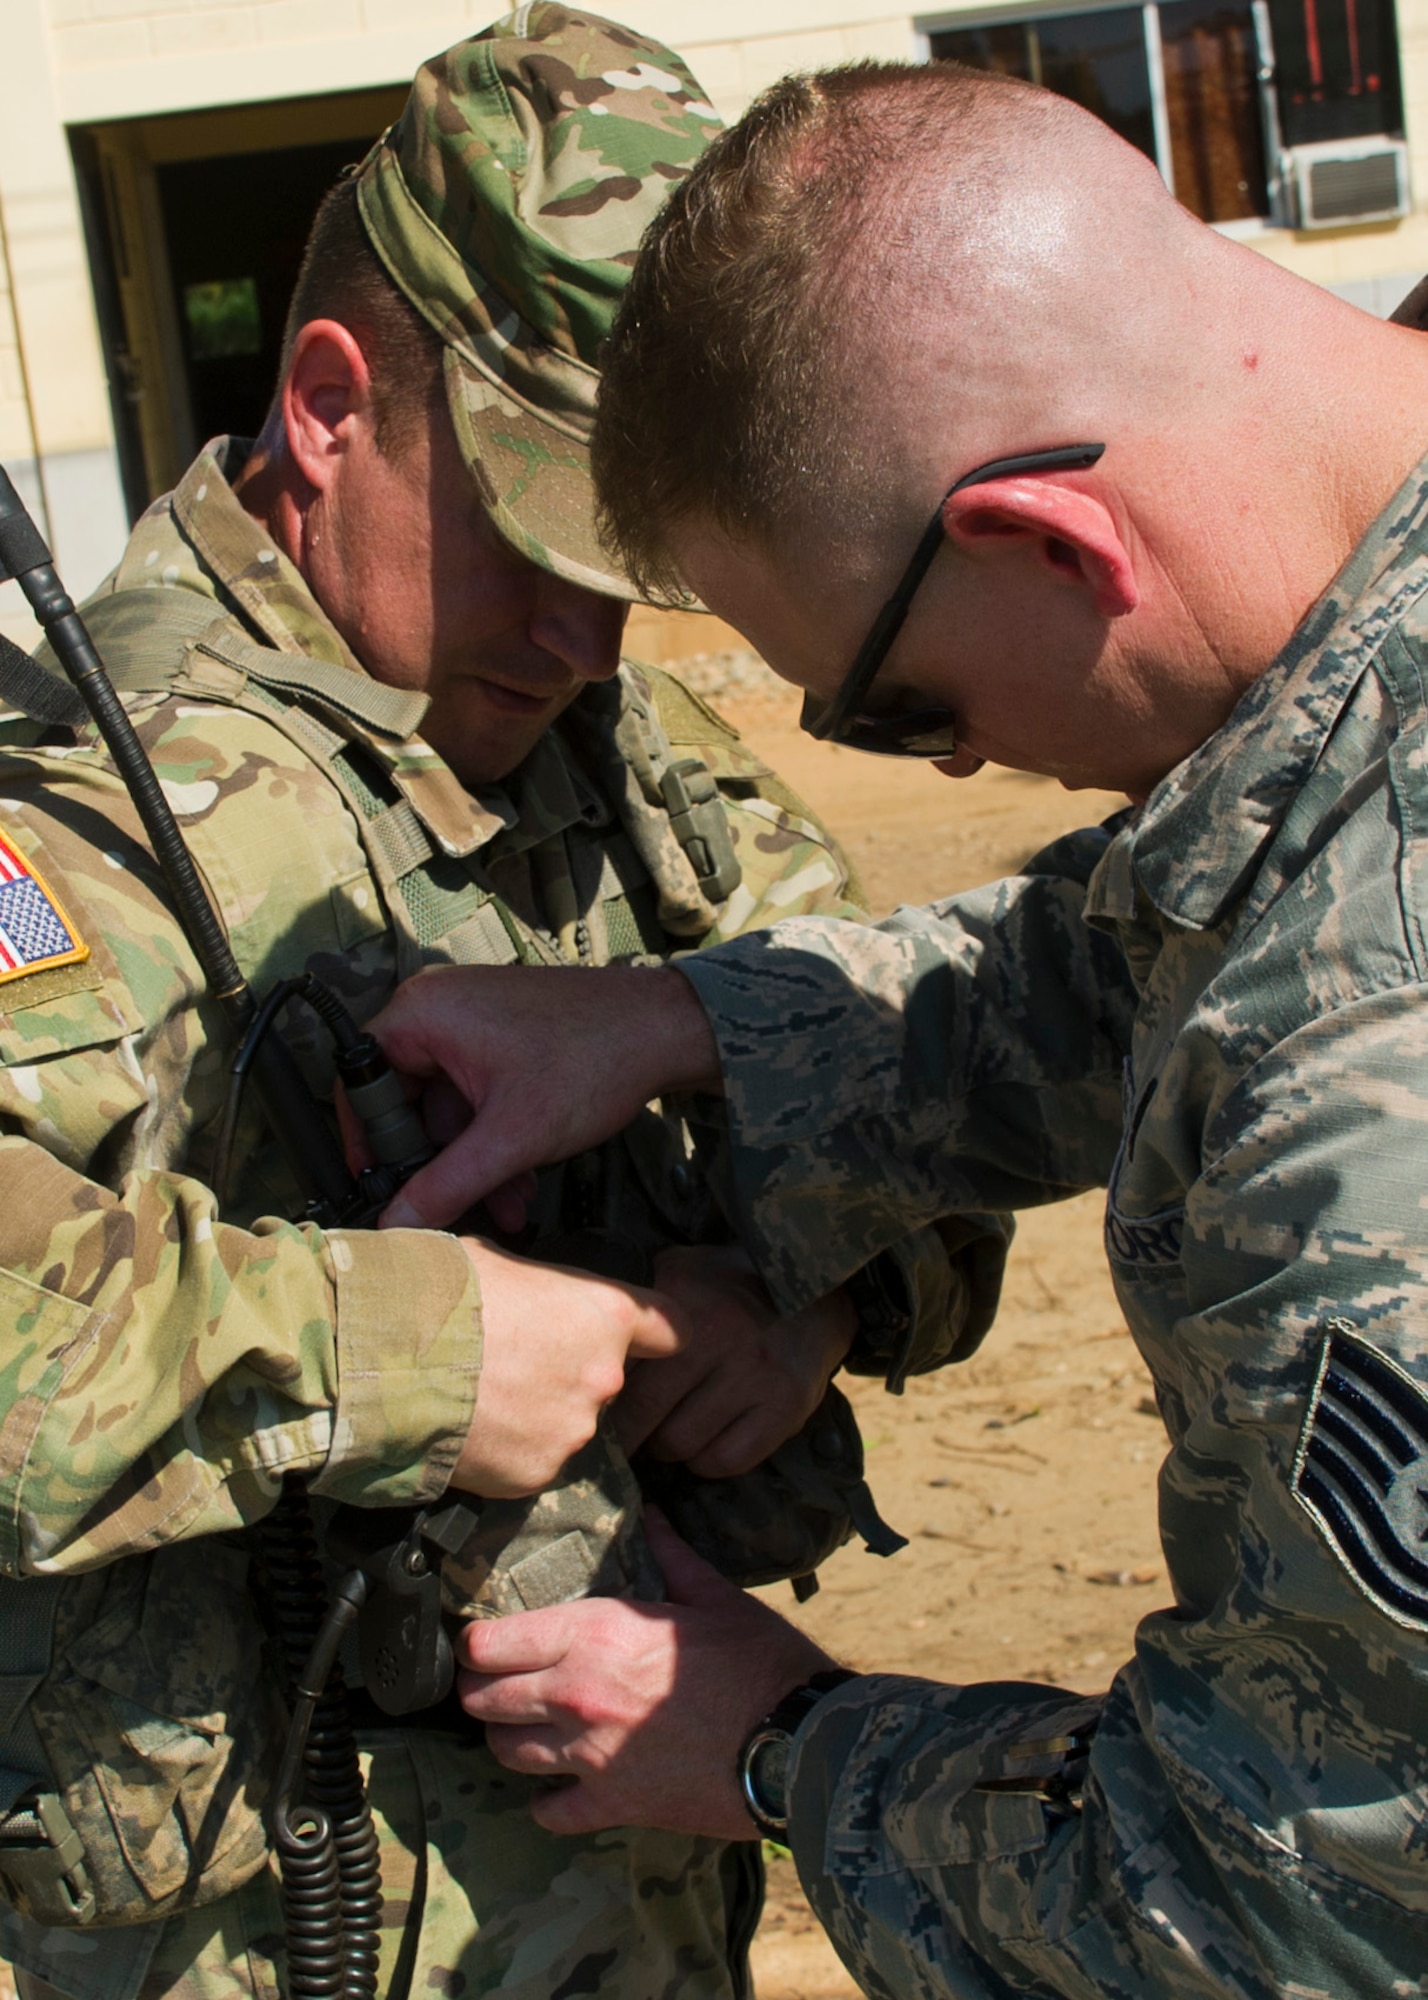 U.S. Air Force Tech. Sgt. Wesley Thaxton, Joint Task Force-Bravo radio operator, helps U.S. Army Capt. John Dills, JTF-Bravo tactical officer in charge, set up his communications for a Honduran troop movement they helped support Dec. 16, 2015, in the Gracias a Dios Department (state) of Honduras. The U.S. personnel served as a key liaison between the U.S. airlift Honduran ground forces, as they transported Honduran soldiers to remote areas of the department, to help disrupt the flow of illicit drugs and materials through the area. (U.S. Air Force photo by Capt. Christopher Mesnard/Released)